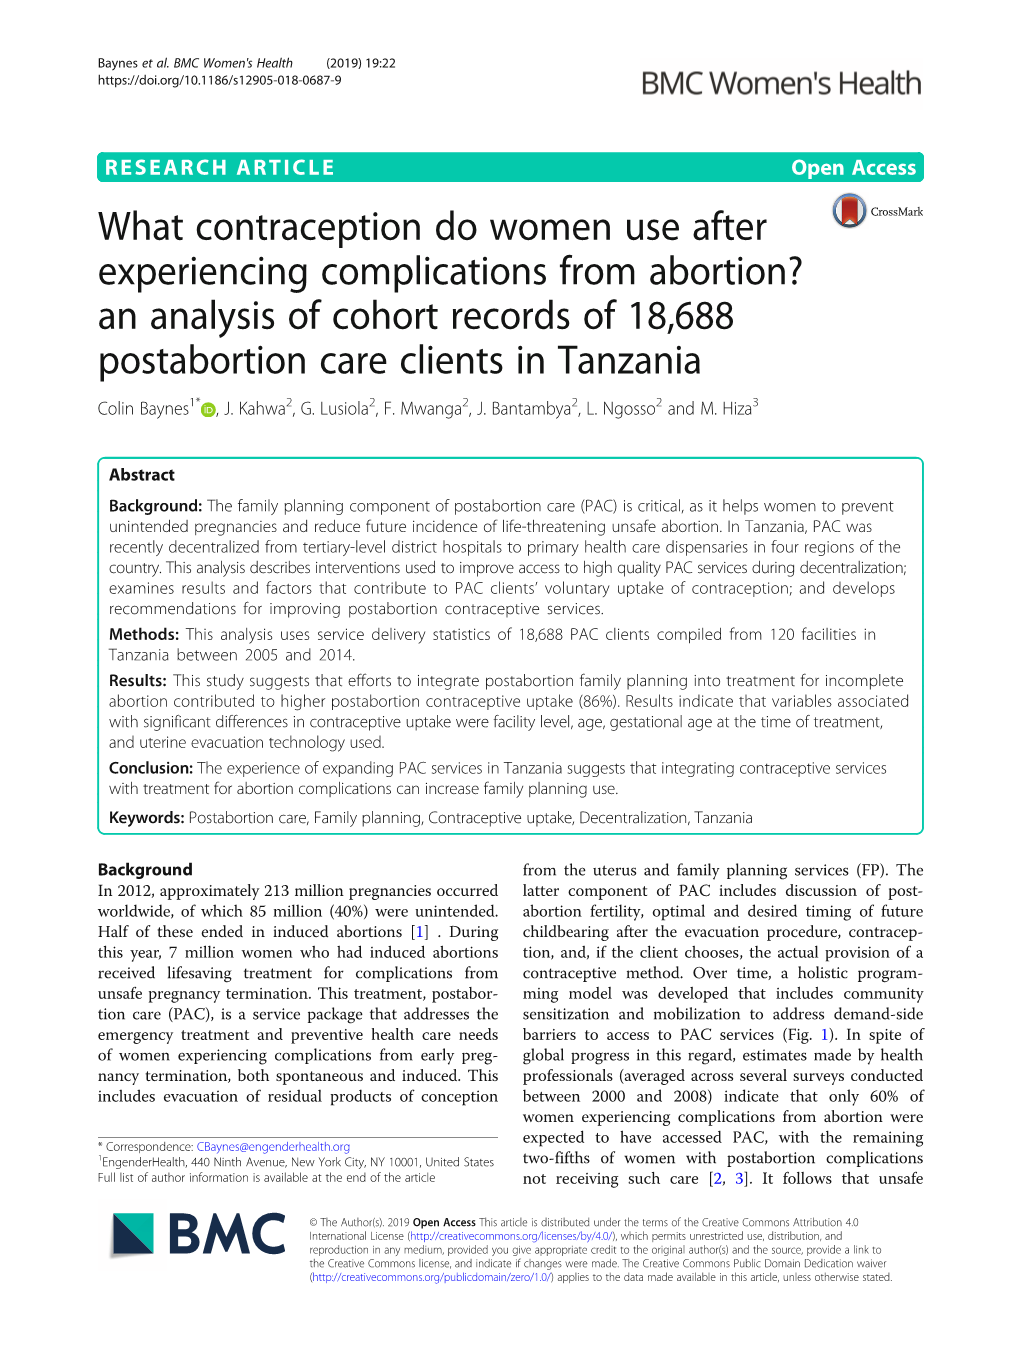 What Contraception Do Women Use After Experiencing Complications